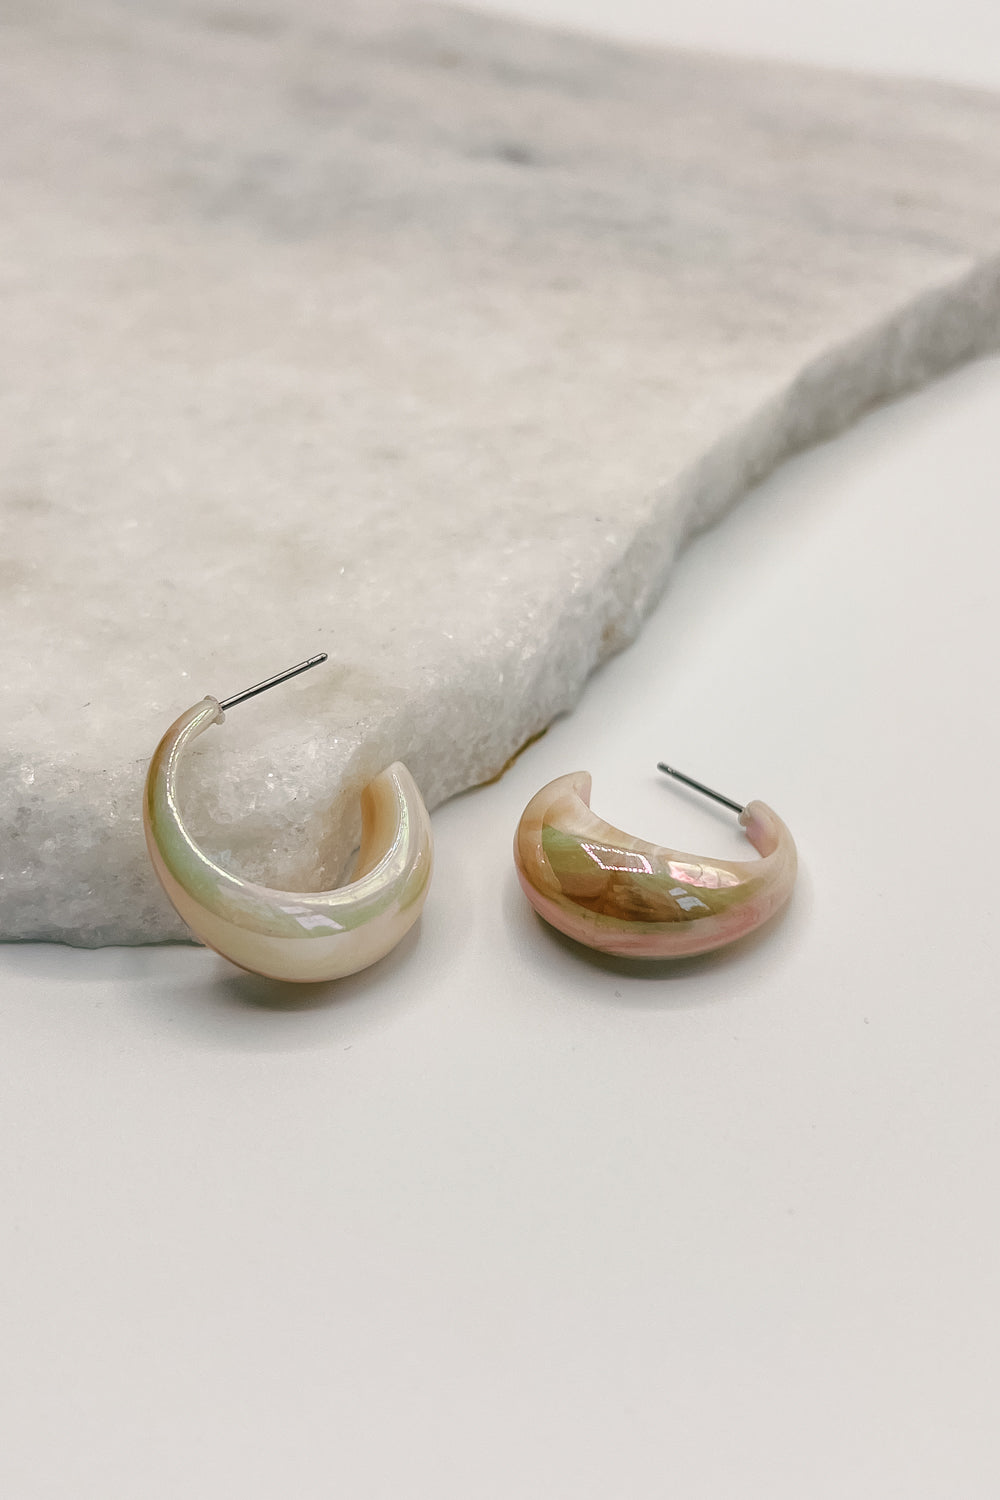 The Charlie Ivory Hoops are shown against a neutral background.